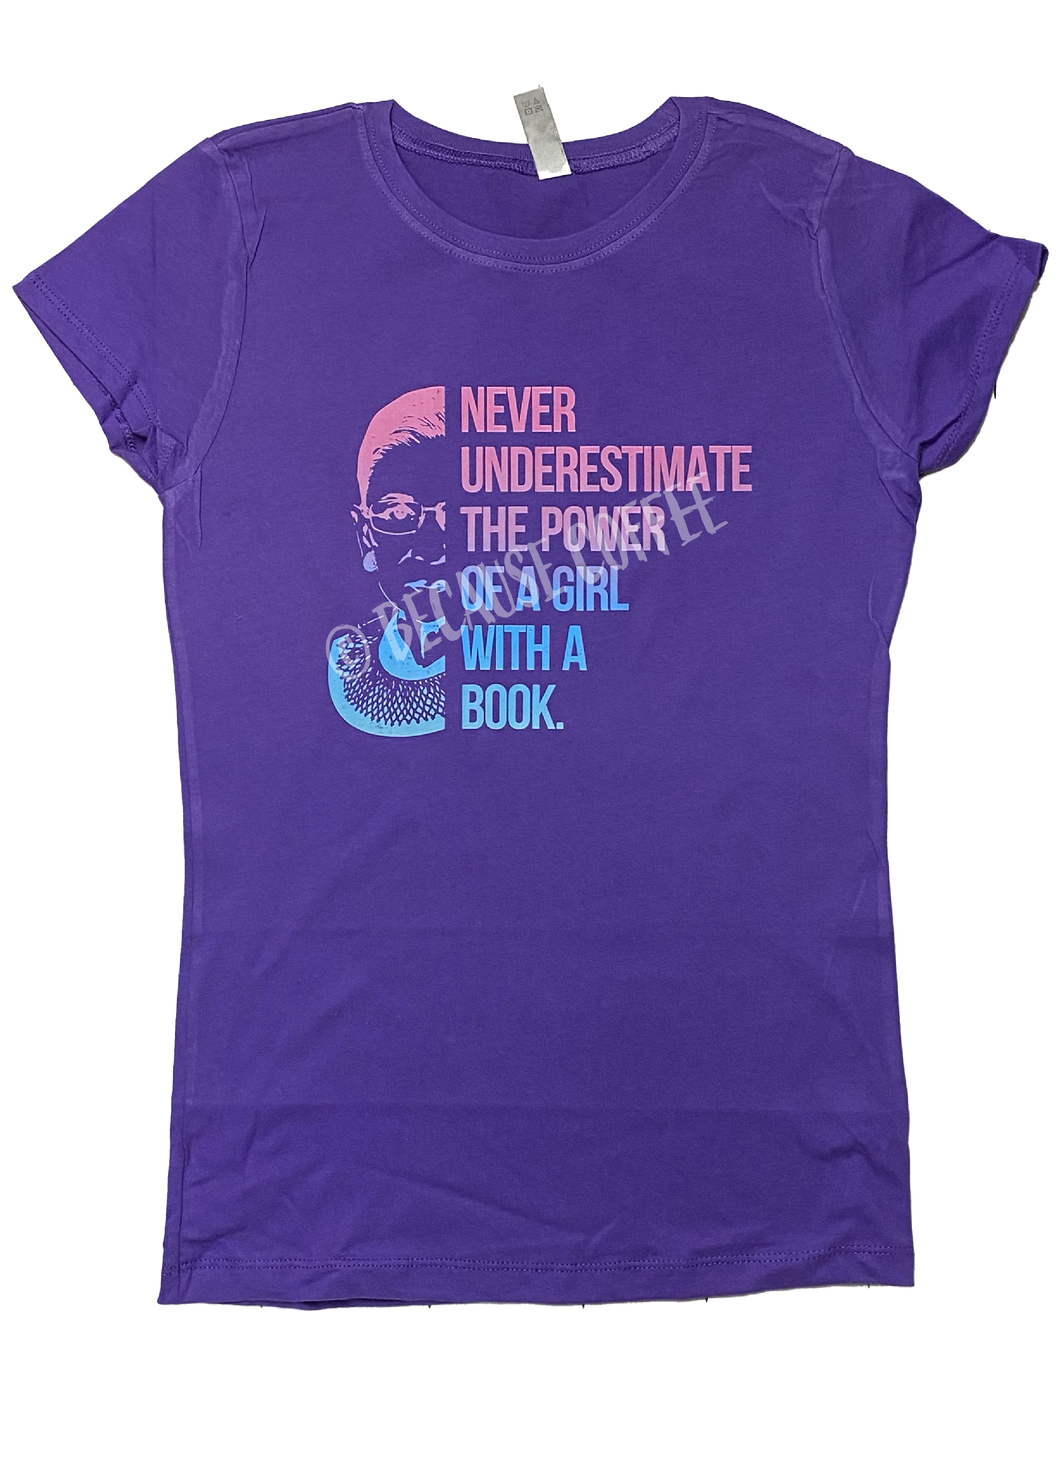 NEVER UNDERESTIMATE THE POWER OF A GIRL WITH A BOOK